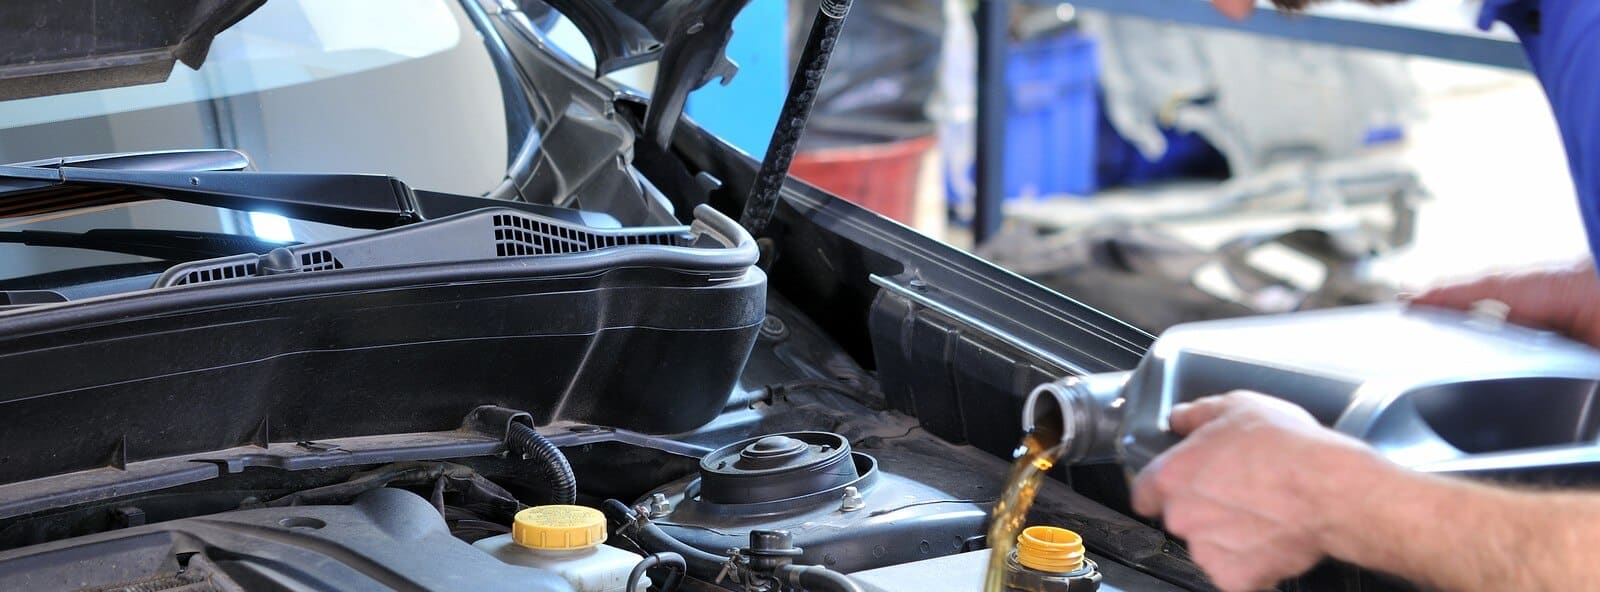 Oil Change Service from Auto Mechanic